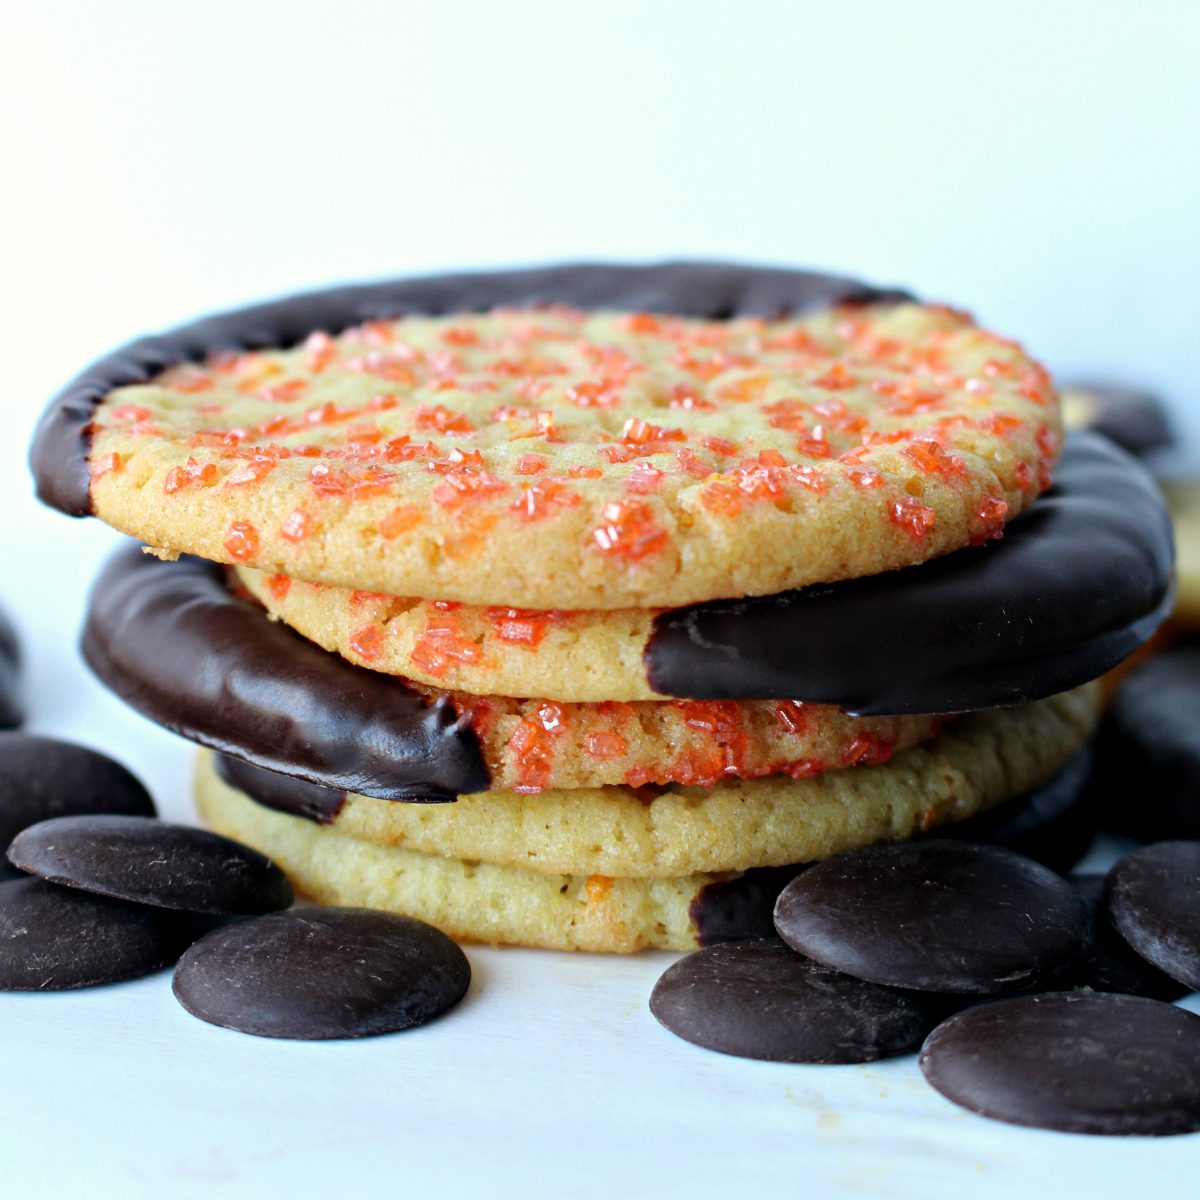 Side view of a stack of cookies with orange sugar and an edge dipped in chocolate.